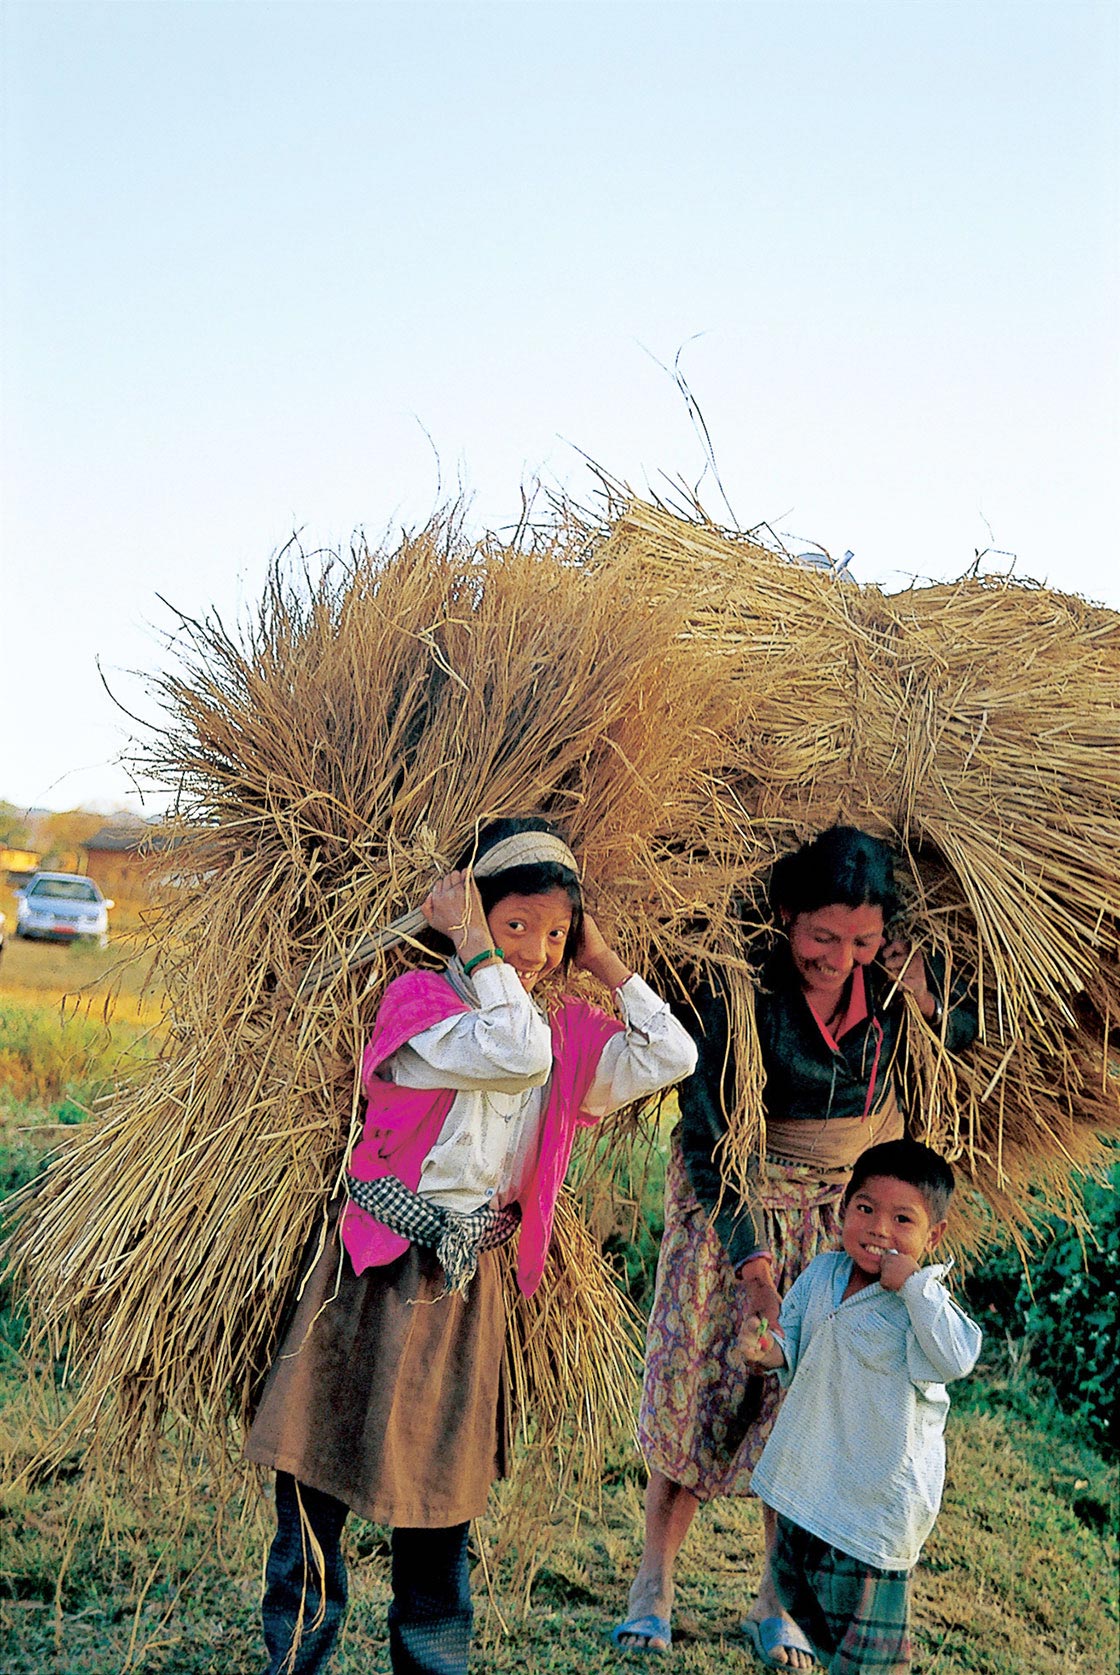 Photo by Daisaku Ikeda – A Mother and Her Children in Nepal